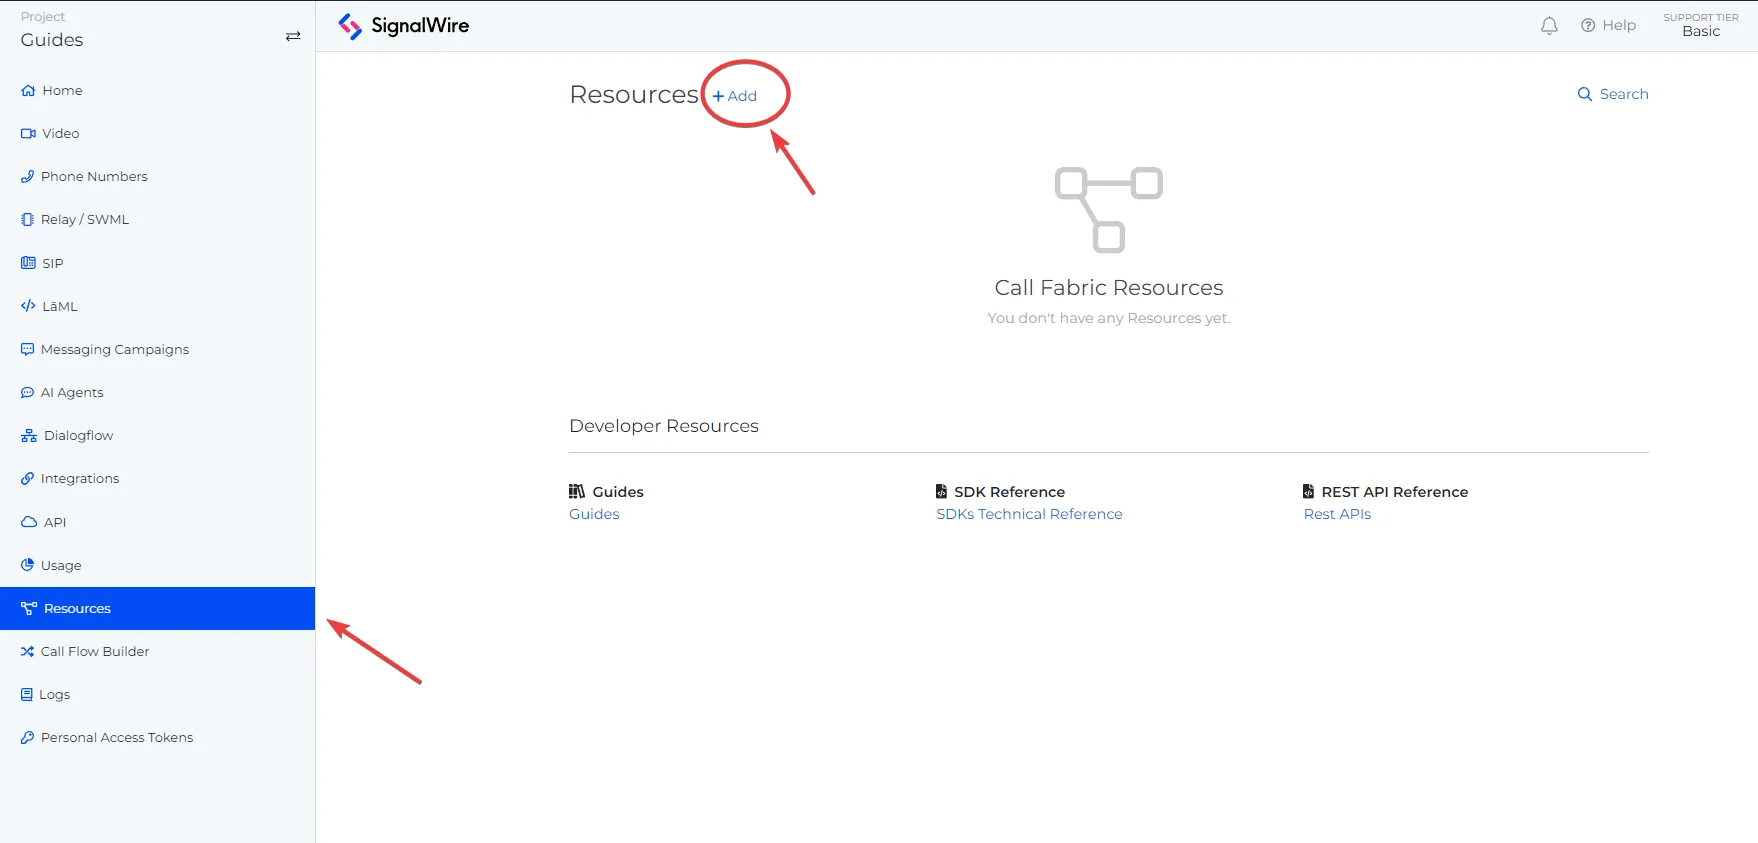 Resources Page on the SignalWire Dashboard. Two arrows points at the 'Resource' and 'Add New' option.